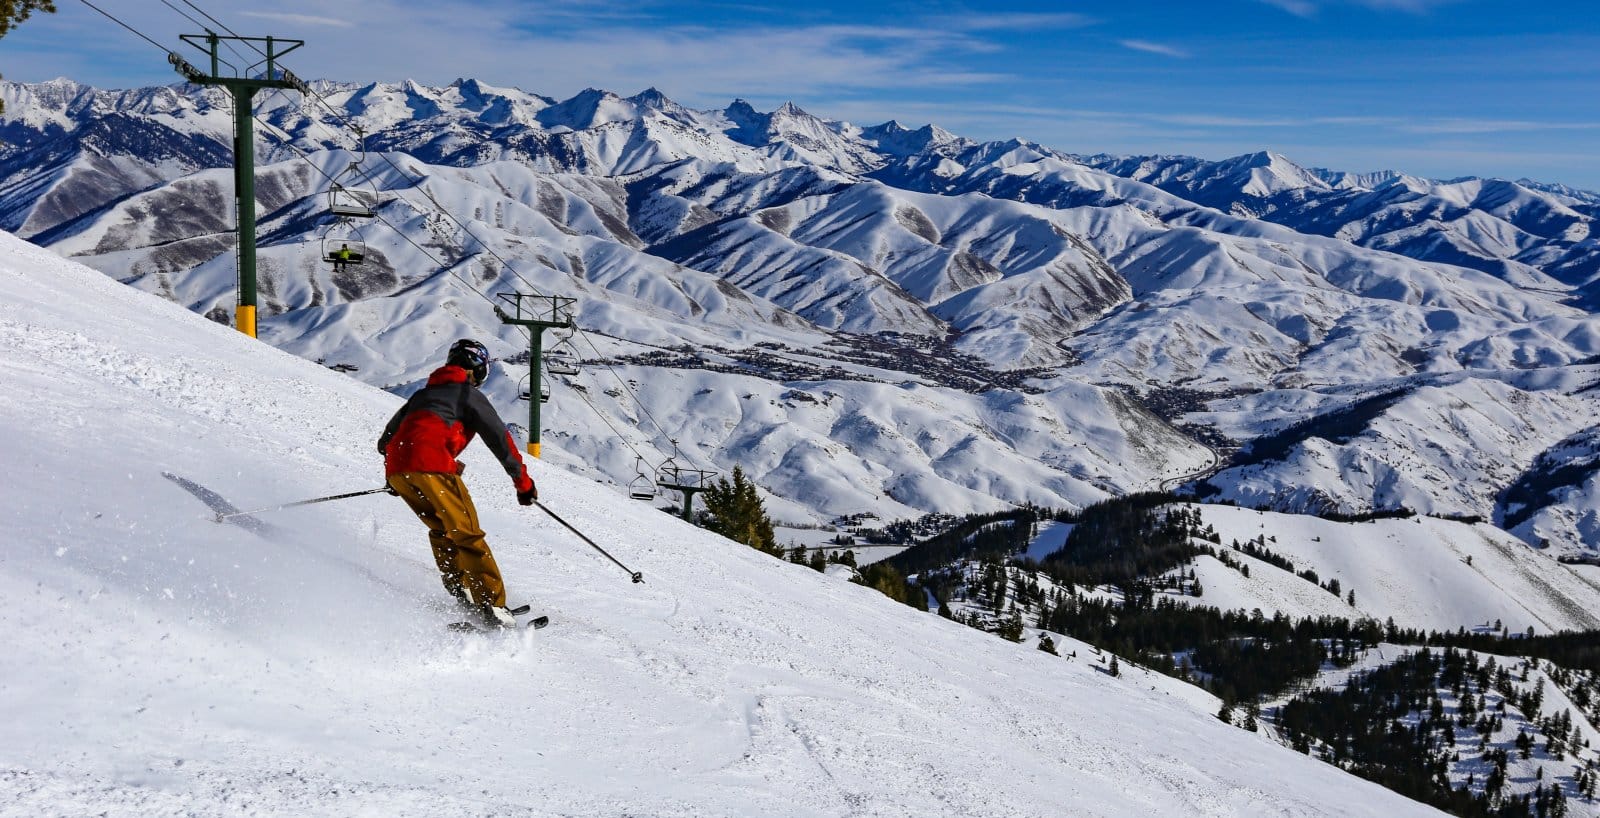 <p class="wp-caption-text">Image Credit: Shutterstock / CSNafzger</p>  <p><span>Ketchum is a gateway to the great outdoors, offering skiing, biking, and small-town charm. It’s a cozy retreat nestled in the beauty of Idaho’s mountains.</span></p>